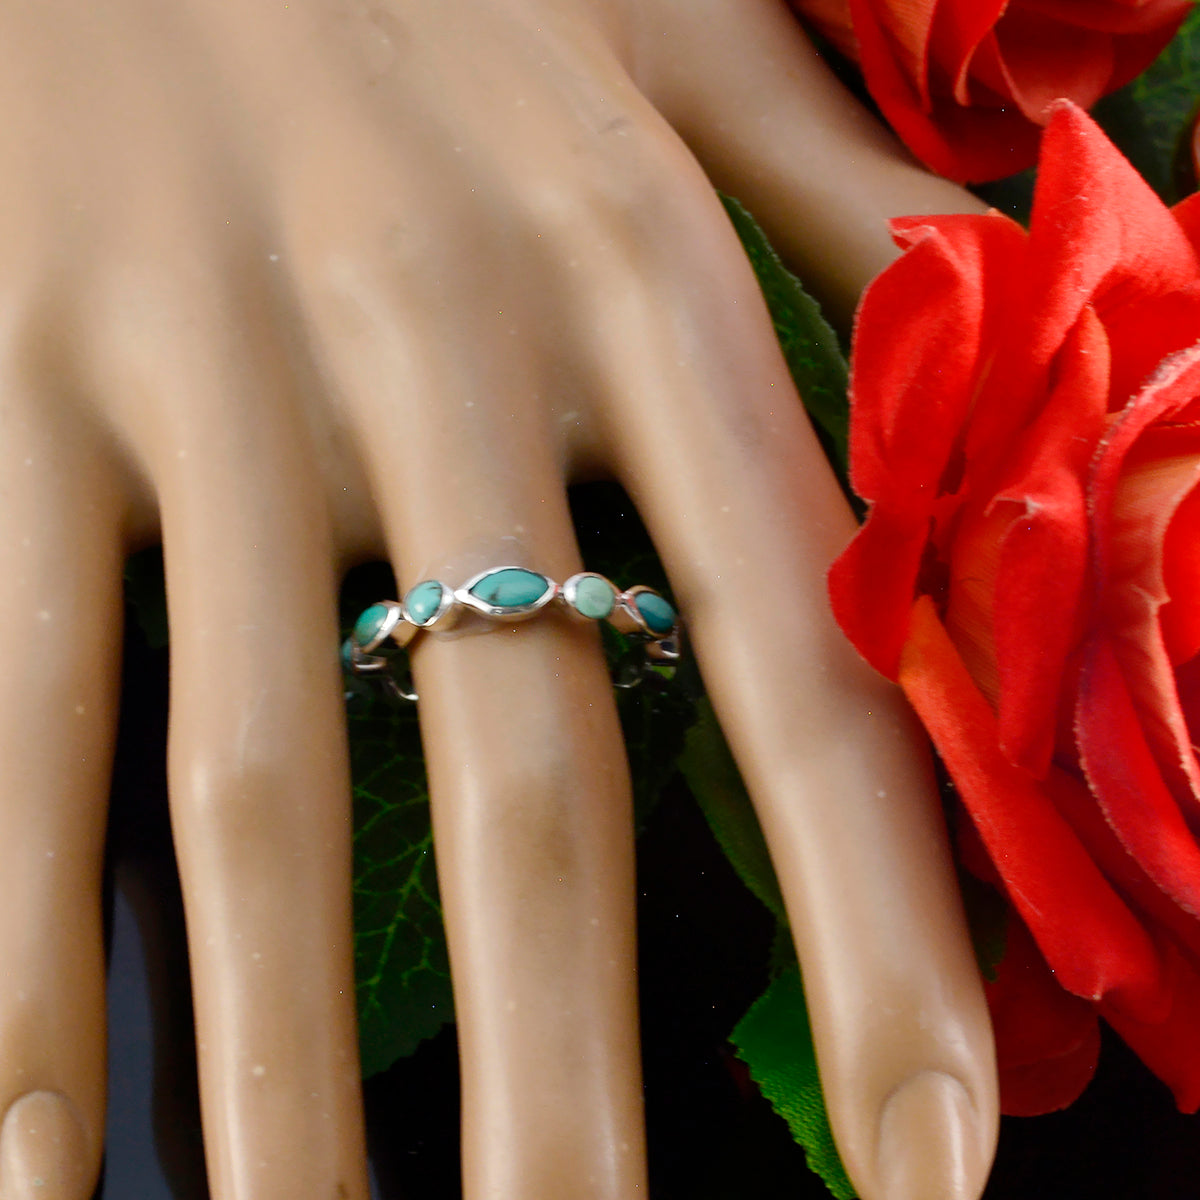 Classy Gems Turquoise Sterling Silver Rings Popular Jewelry Brands